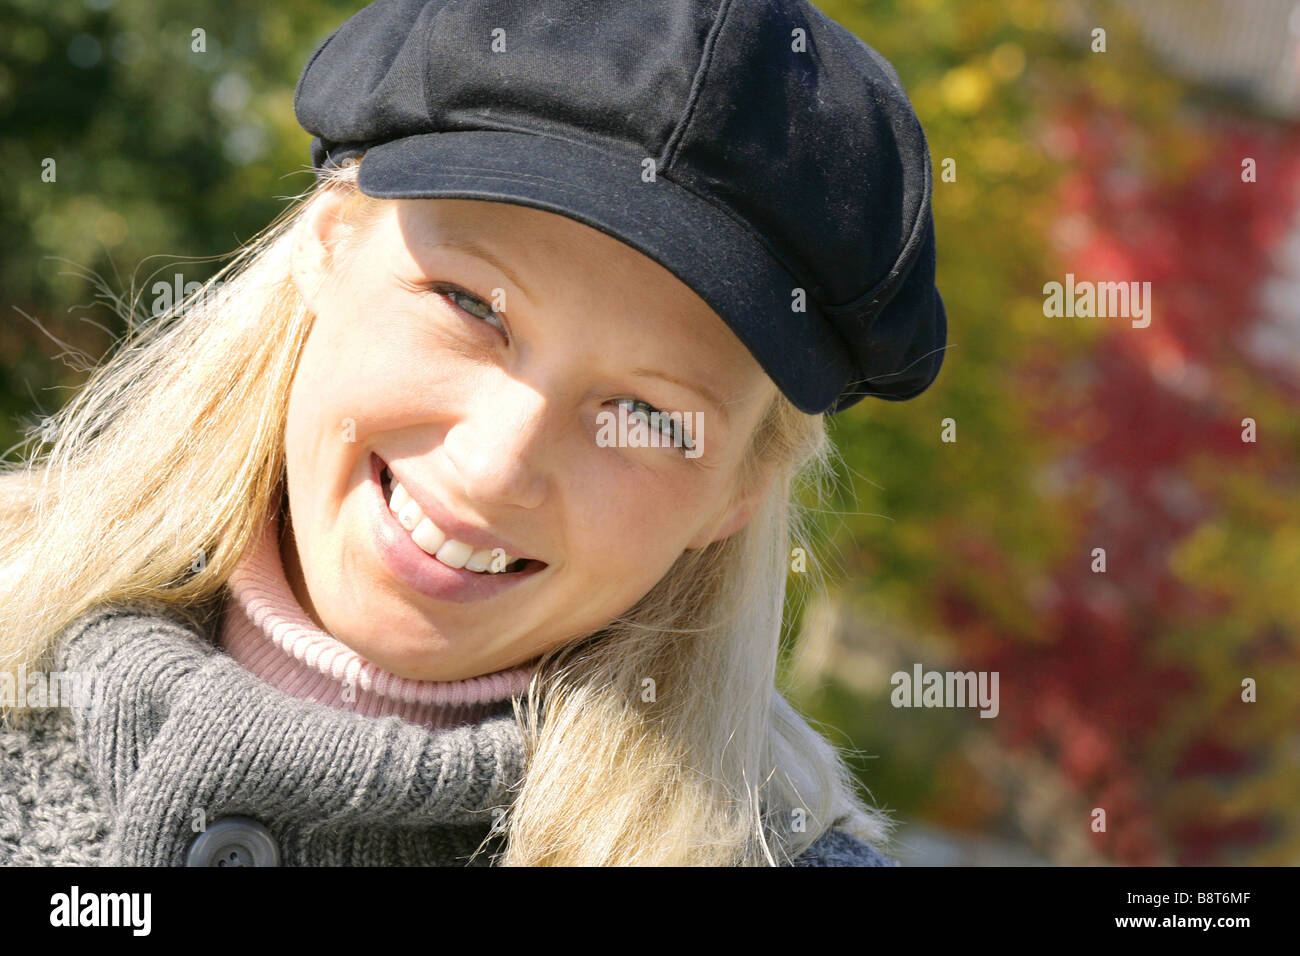 young blond girl with cap, smiling Stock Photo